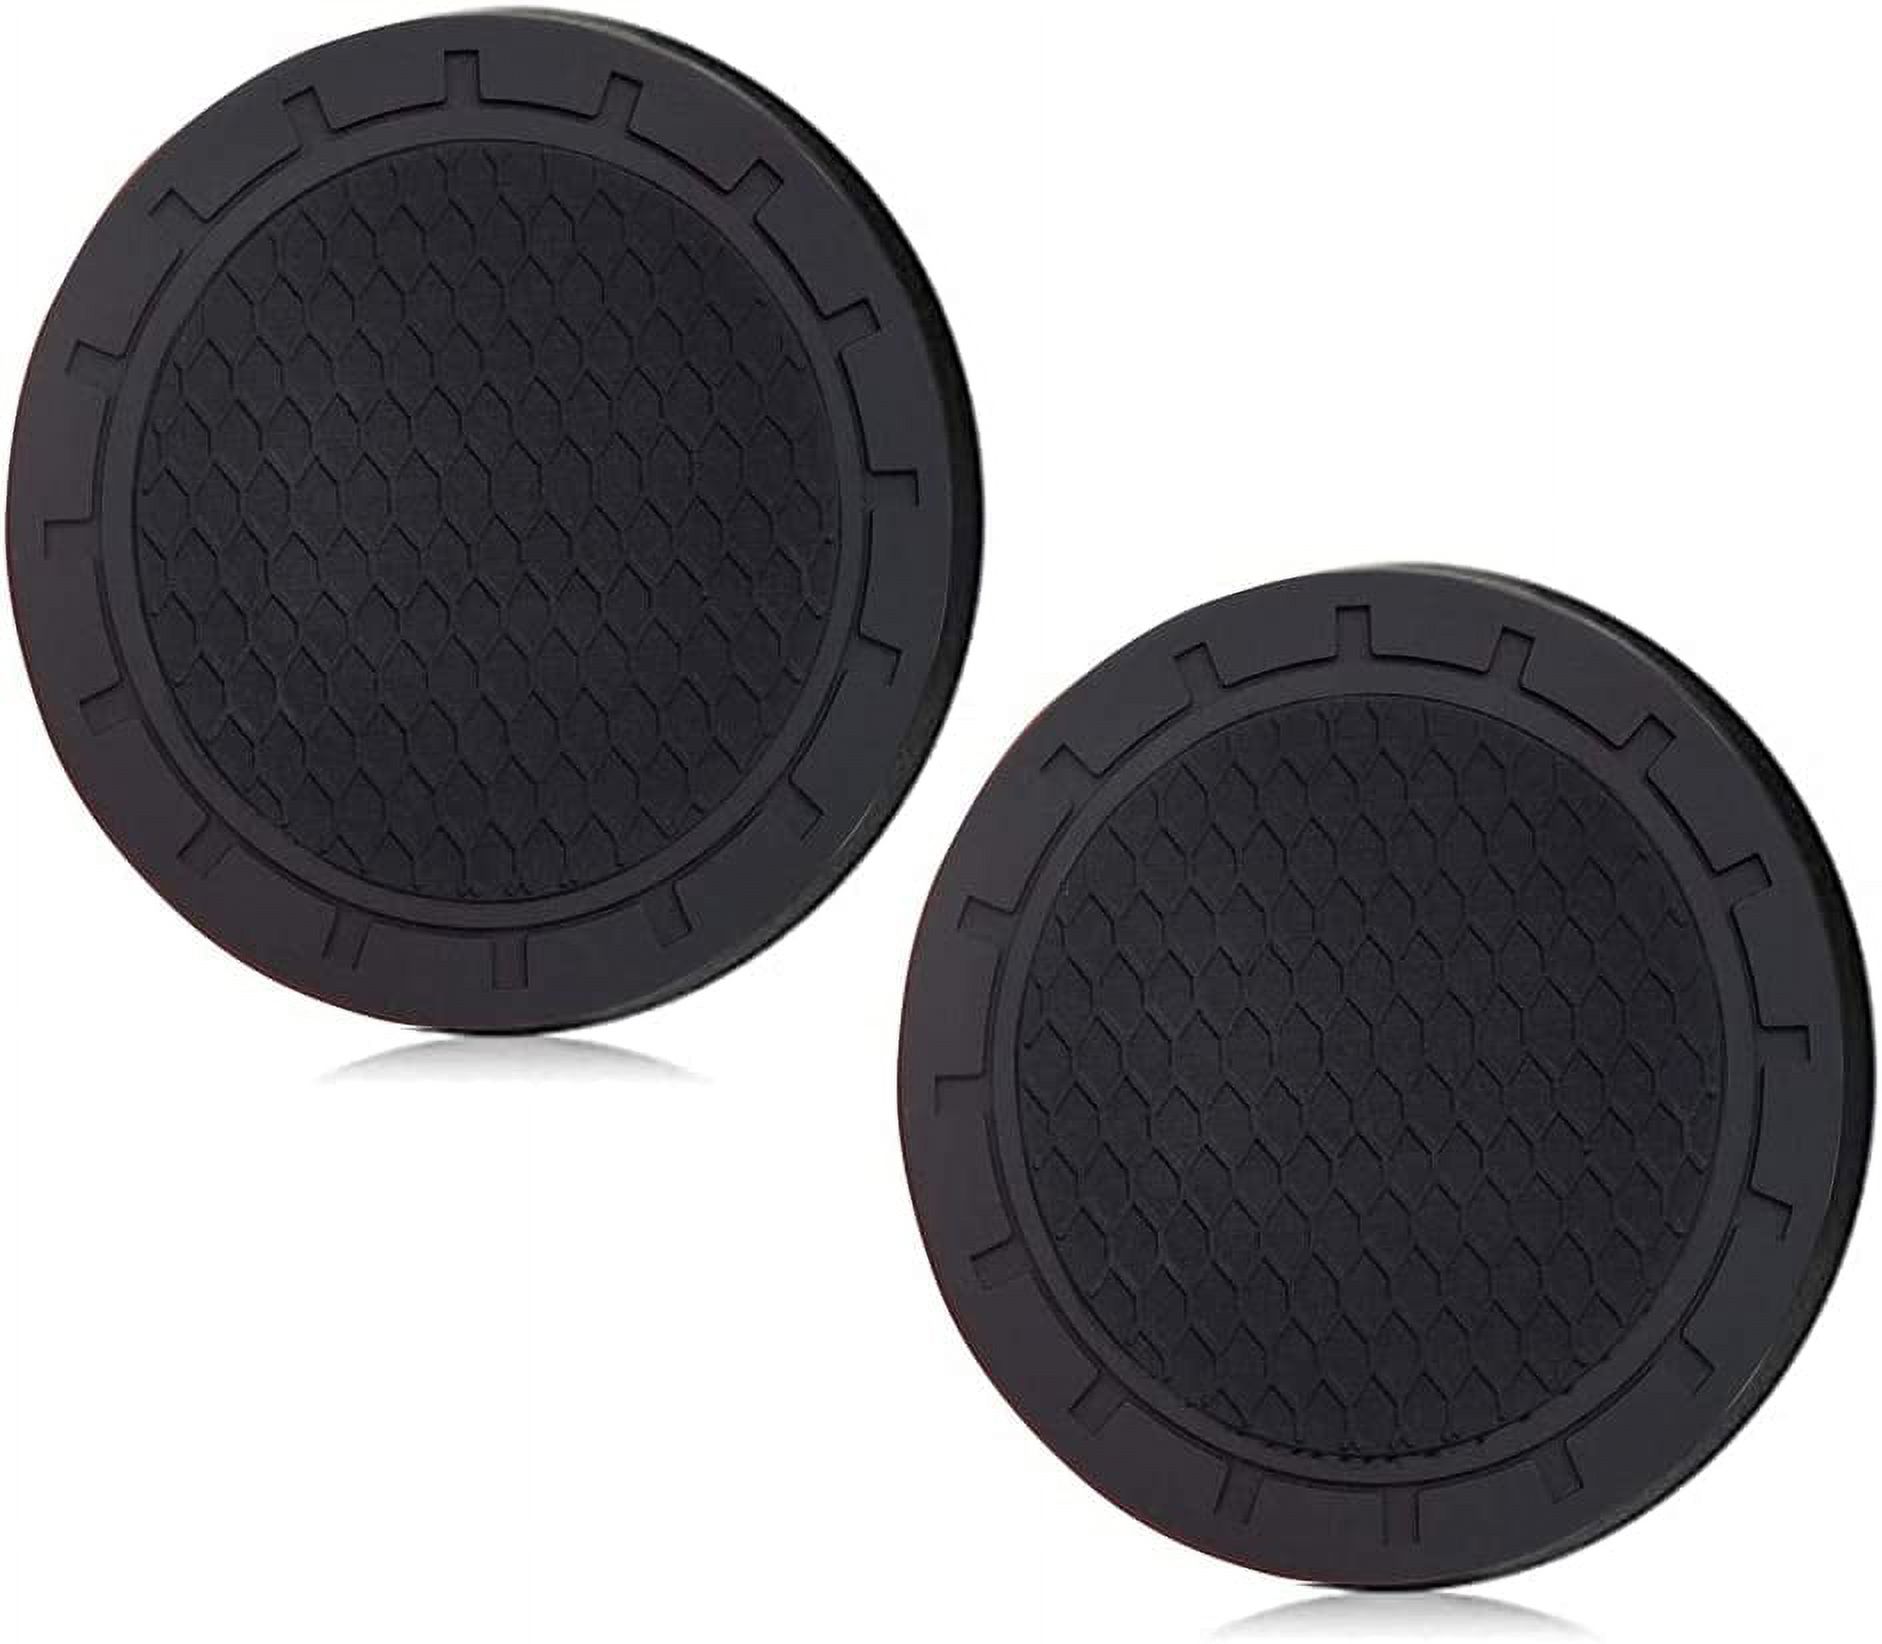 2.75 in Car Coasters for Cup Holders Anti Slip car Cup Holder